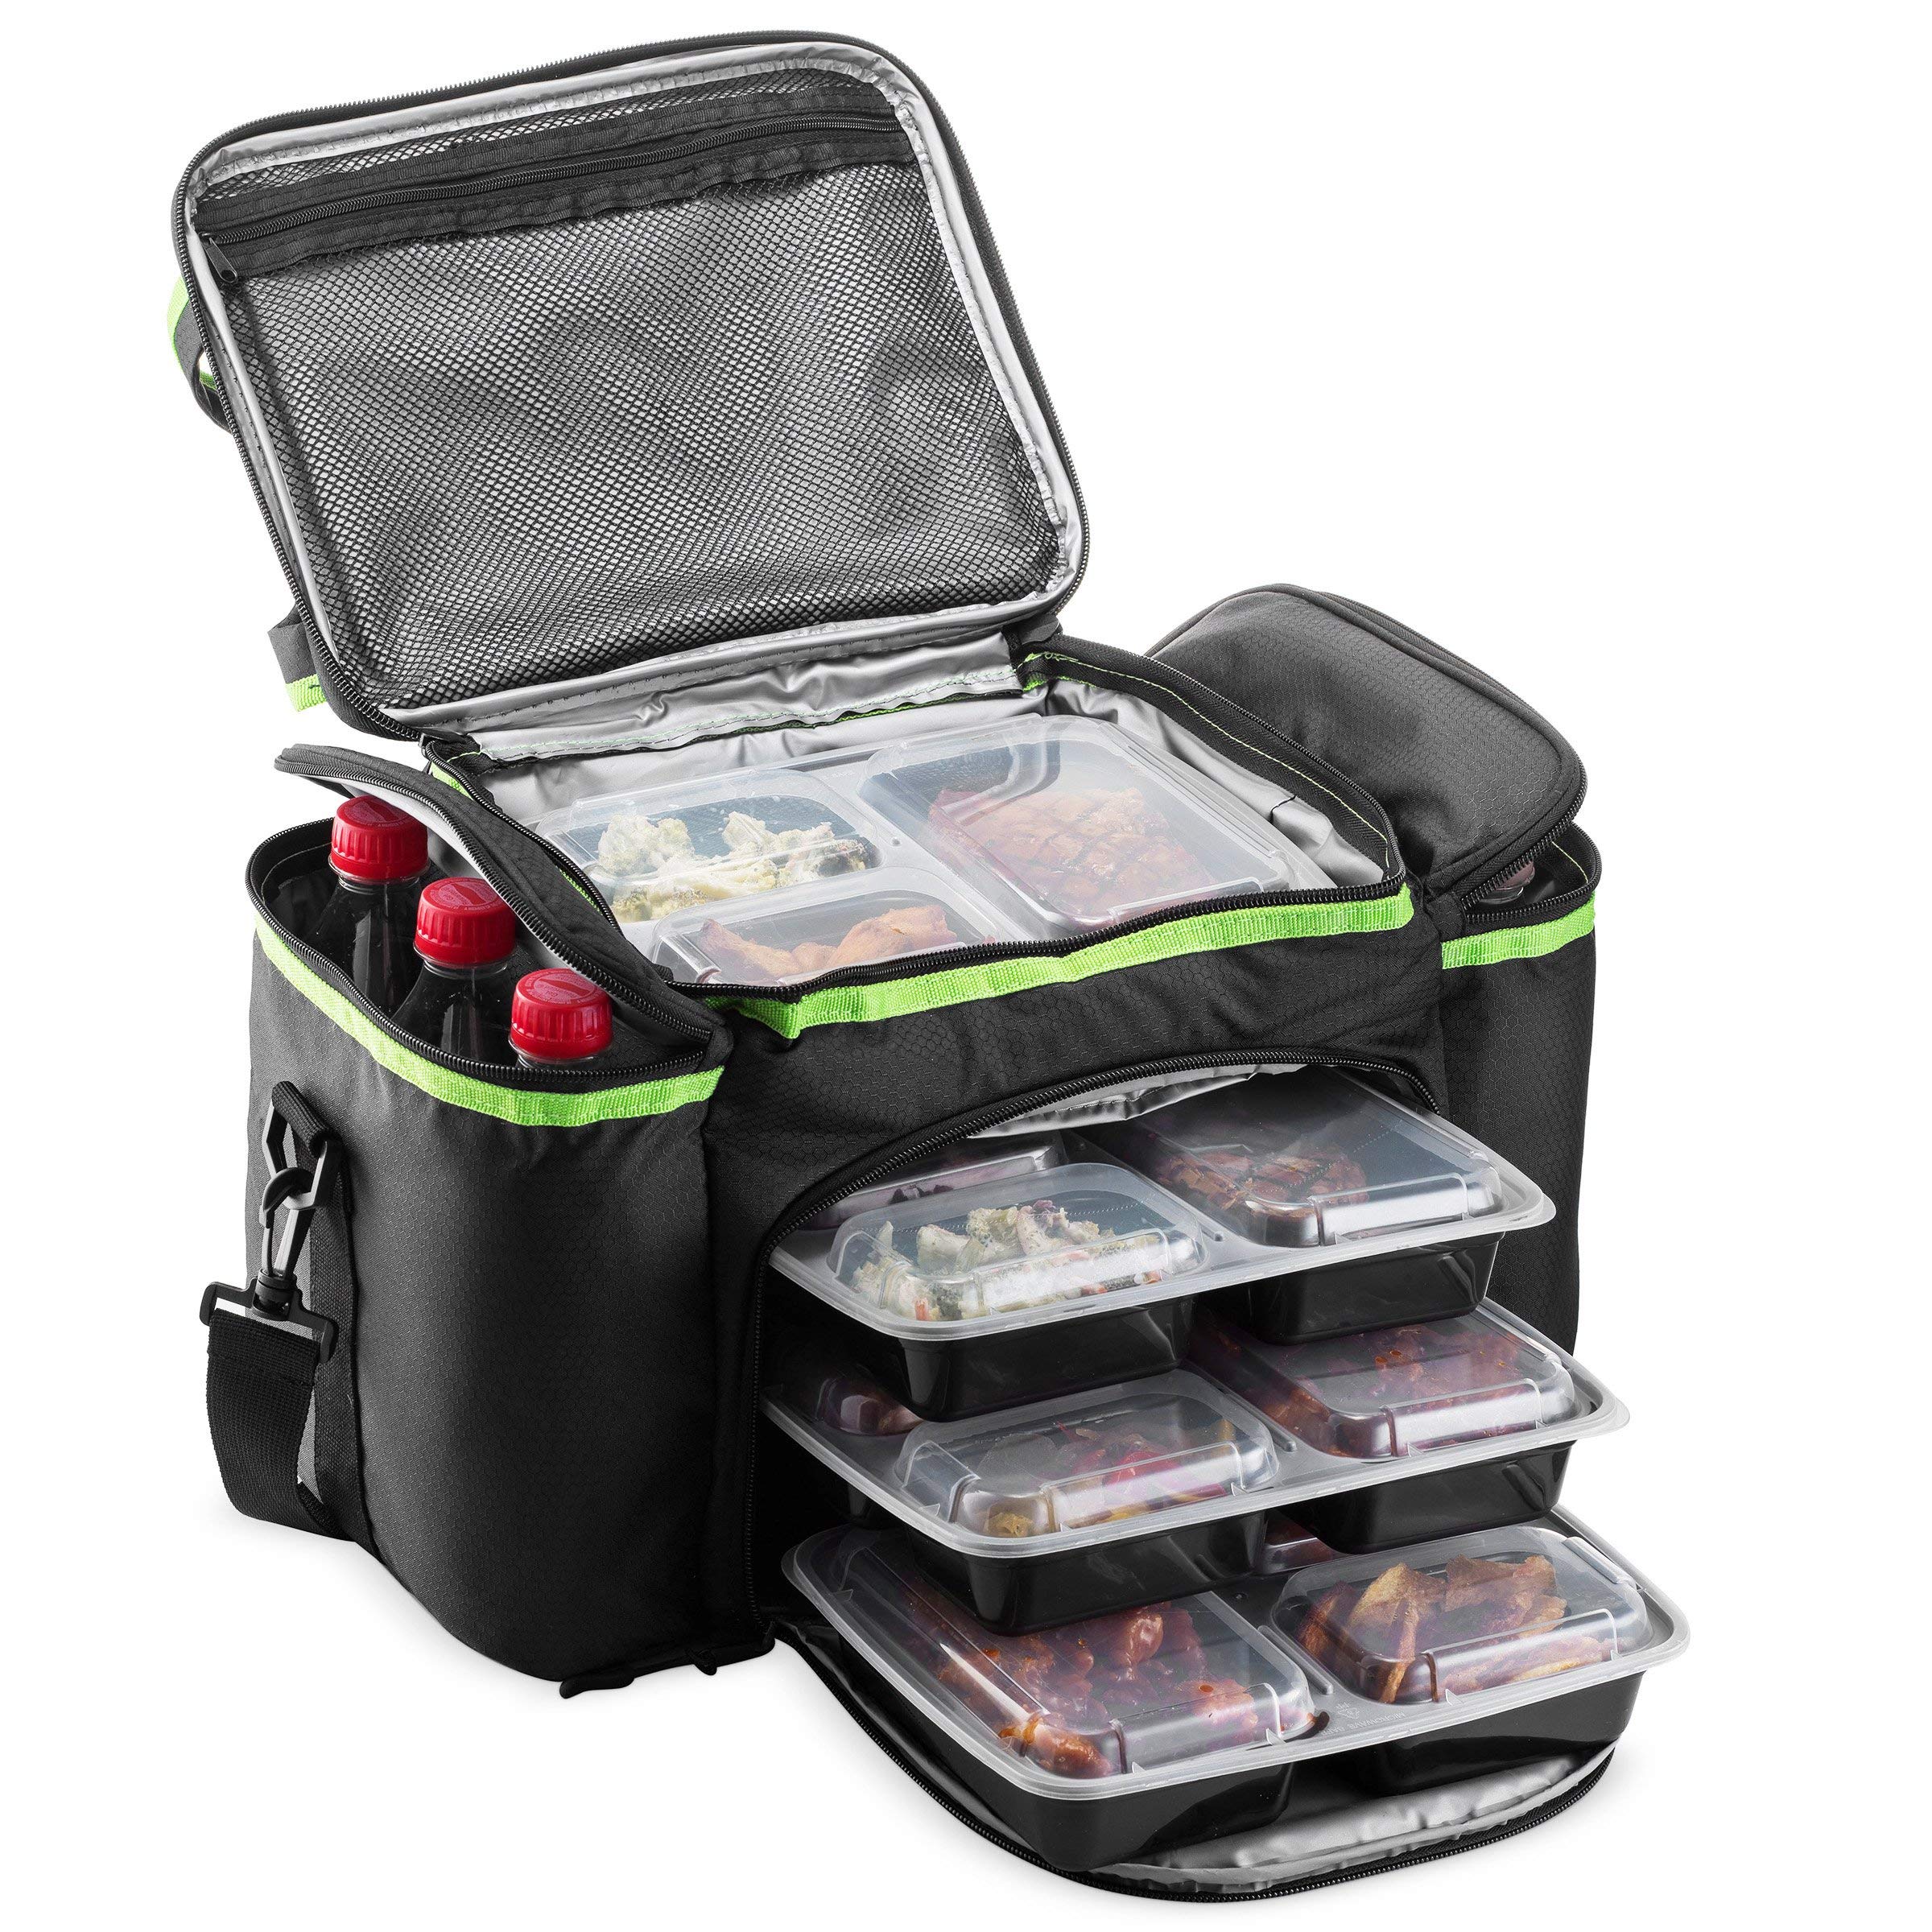 Cooler Lunch Bag Box Insulated by Outdoorwares Large Capacity Durable, to Keep Foods and Drinks in The Right Temperature - Good for Travel, Picnic, Beach Hiking, Camping ETC.(Containers Not Included) BLACK GREEN